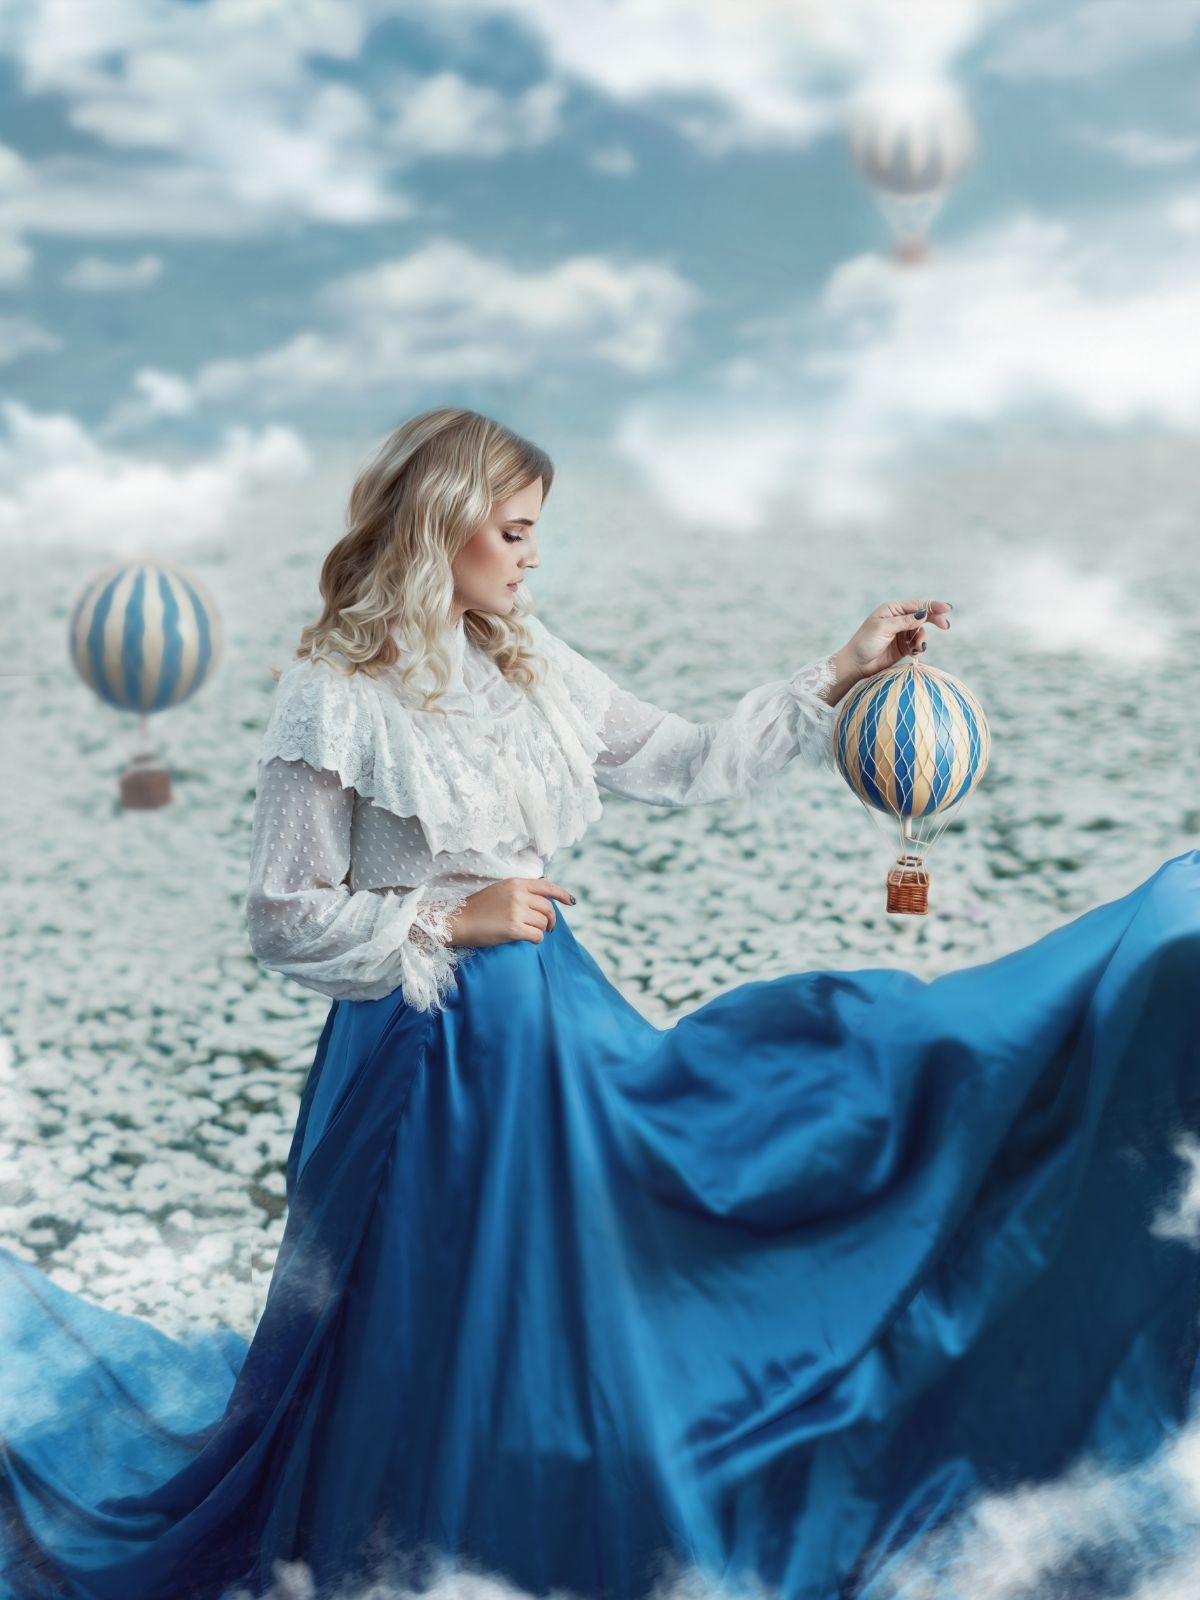 These Photoshoots Give an Everlasting Life to Otherwise Wasted Flowers - hot air balloons - art photo projects on thursd